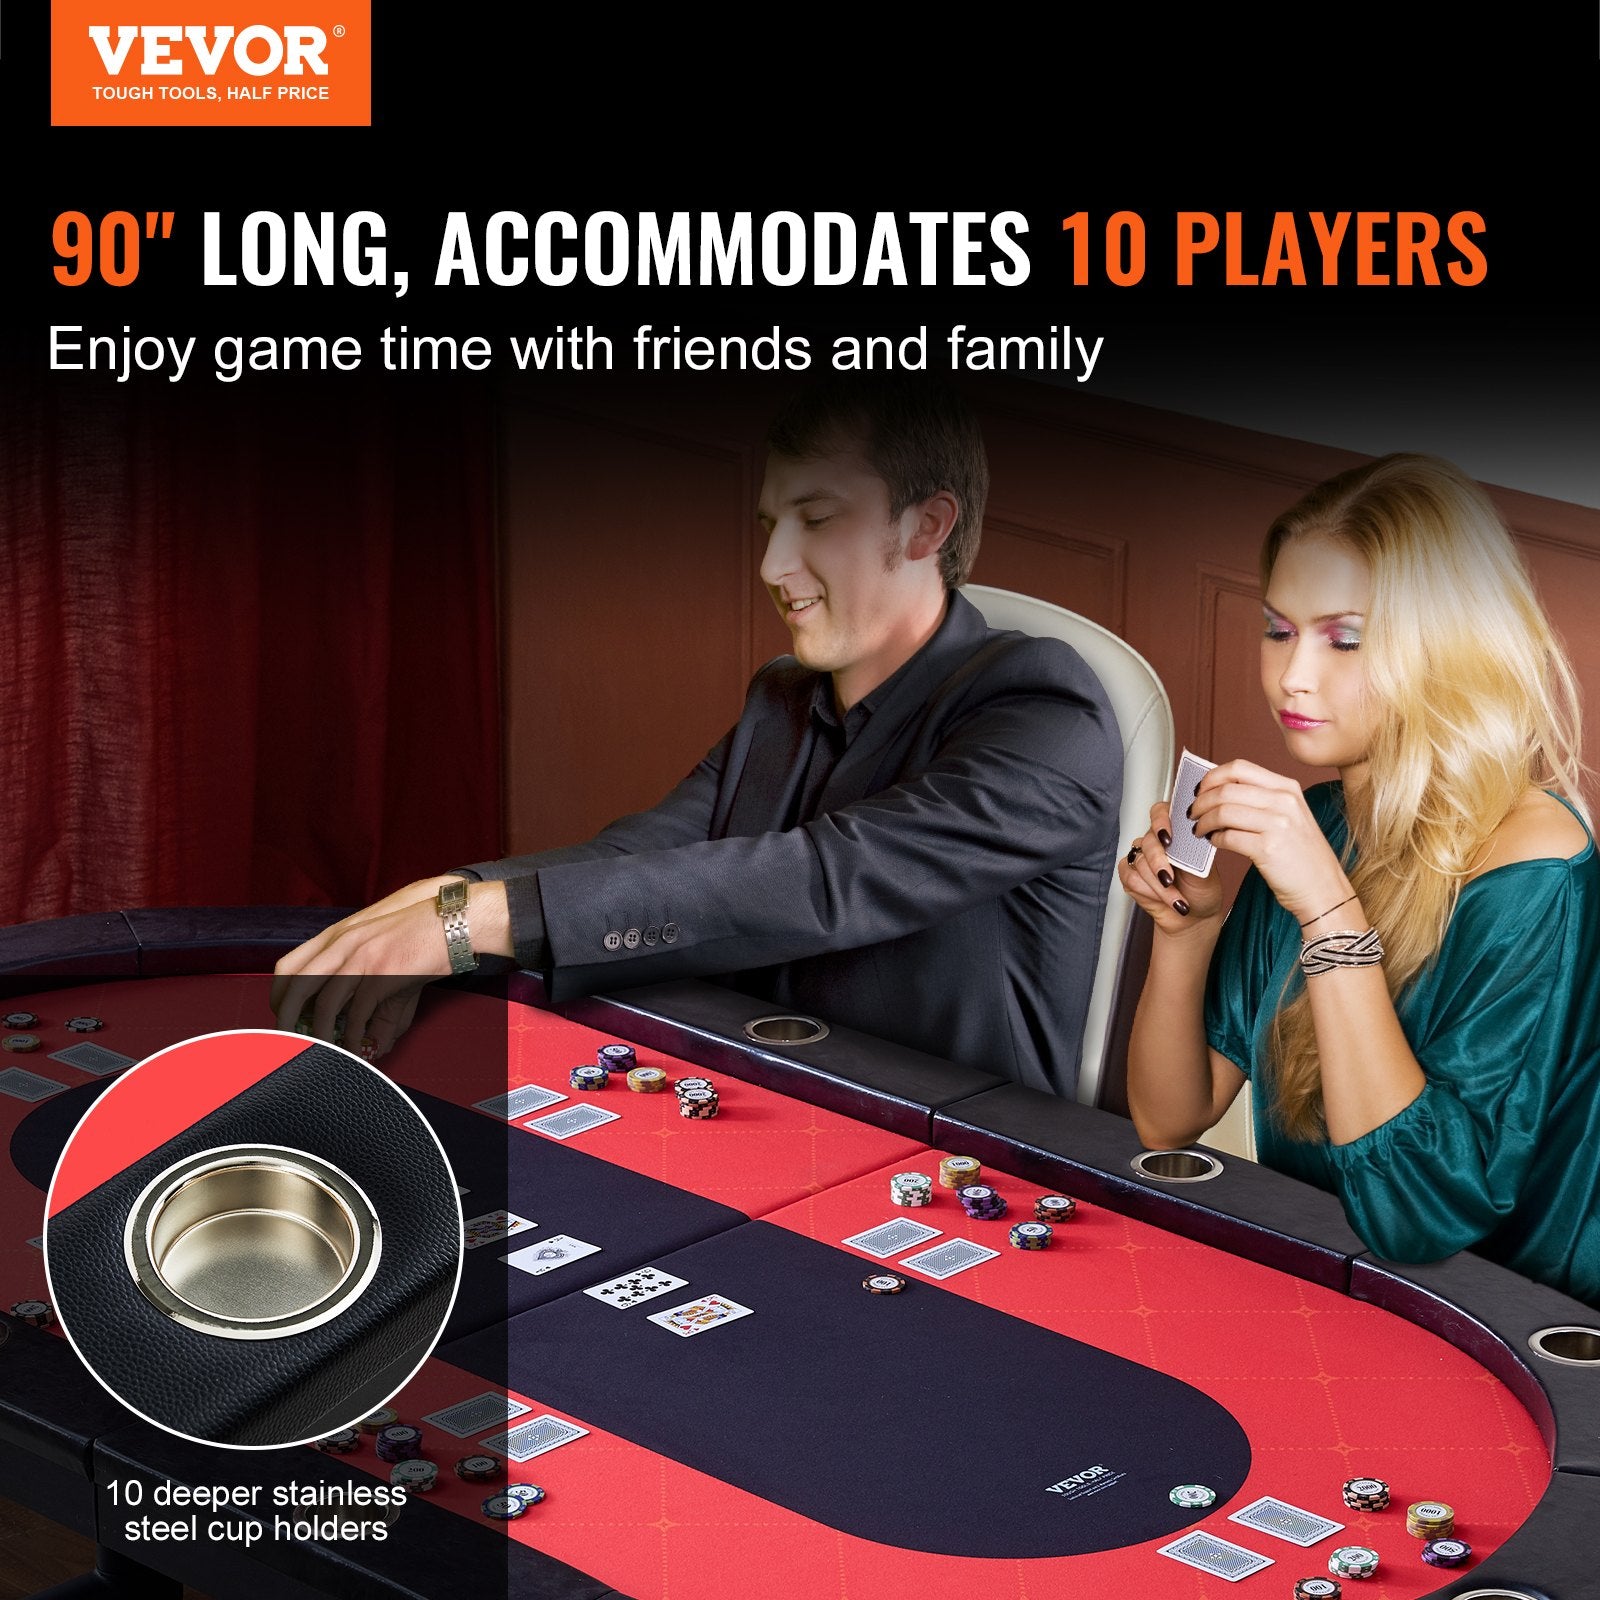 Vevor 10 Player Foldable 90" Oval Poker Table w/ Stainless Steel Cup Holders and Padded Rails